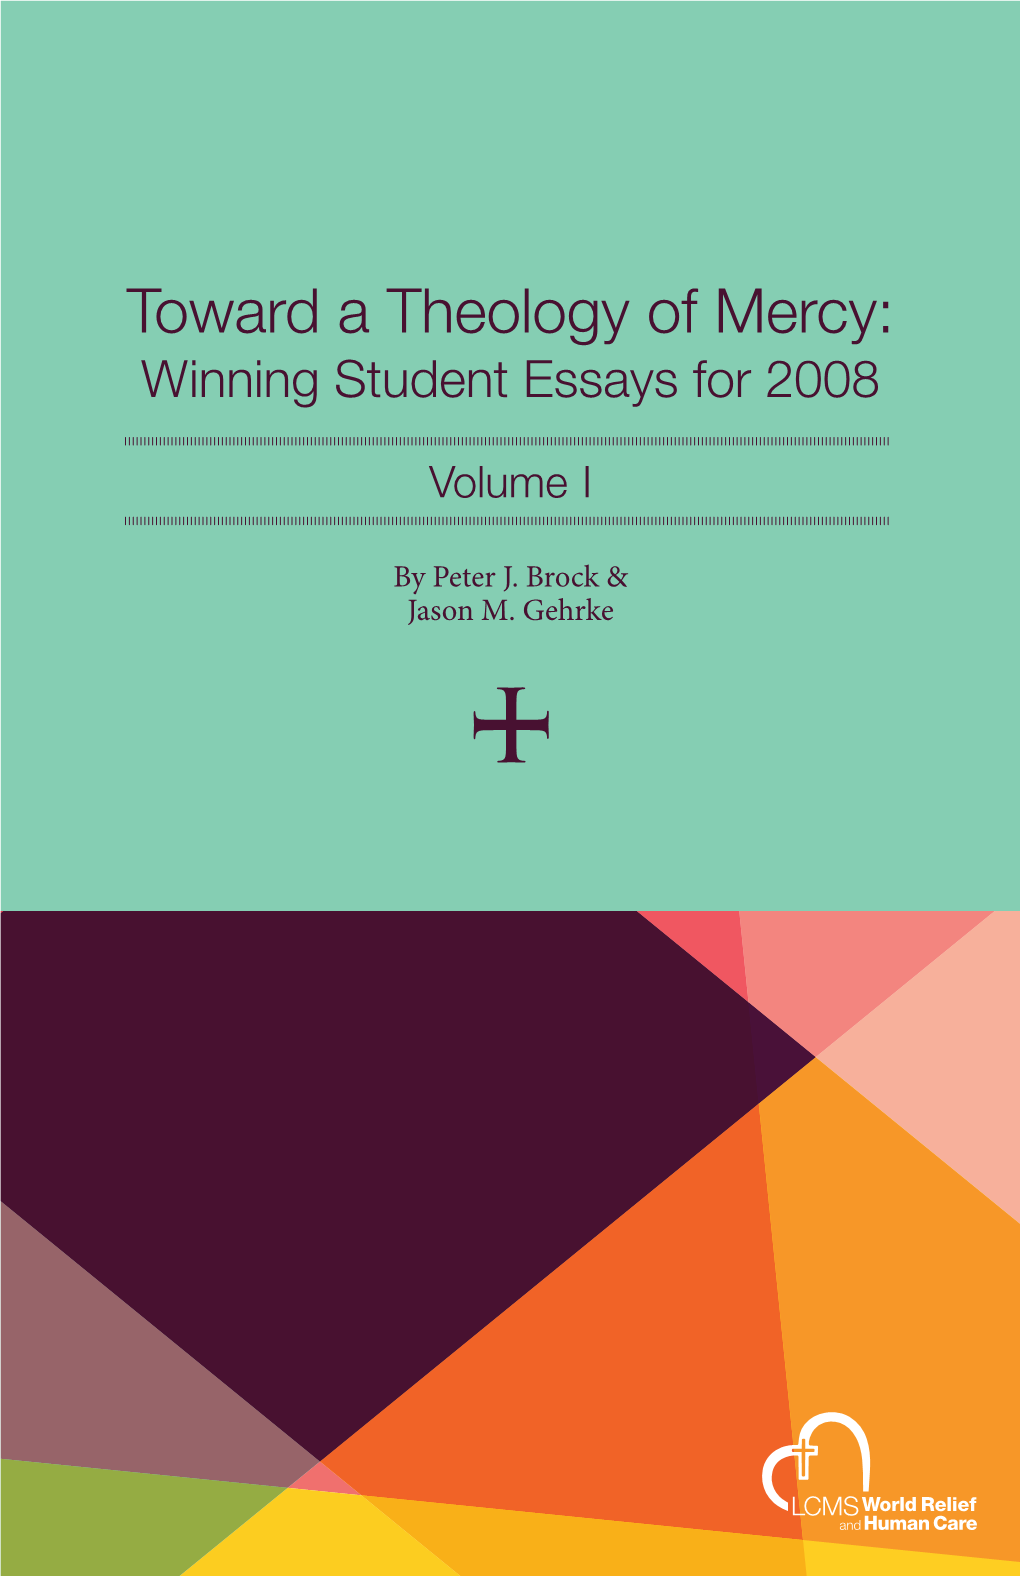 Toward a Theology of Mercy: Winning Student Essays for 2008